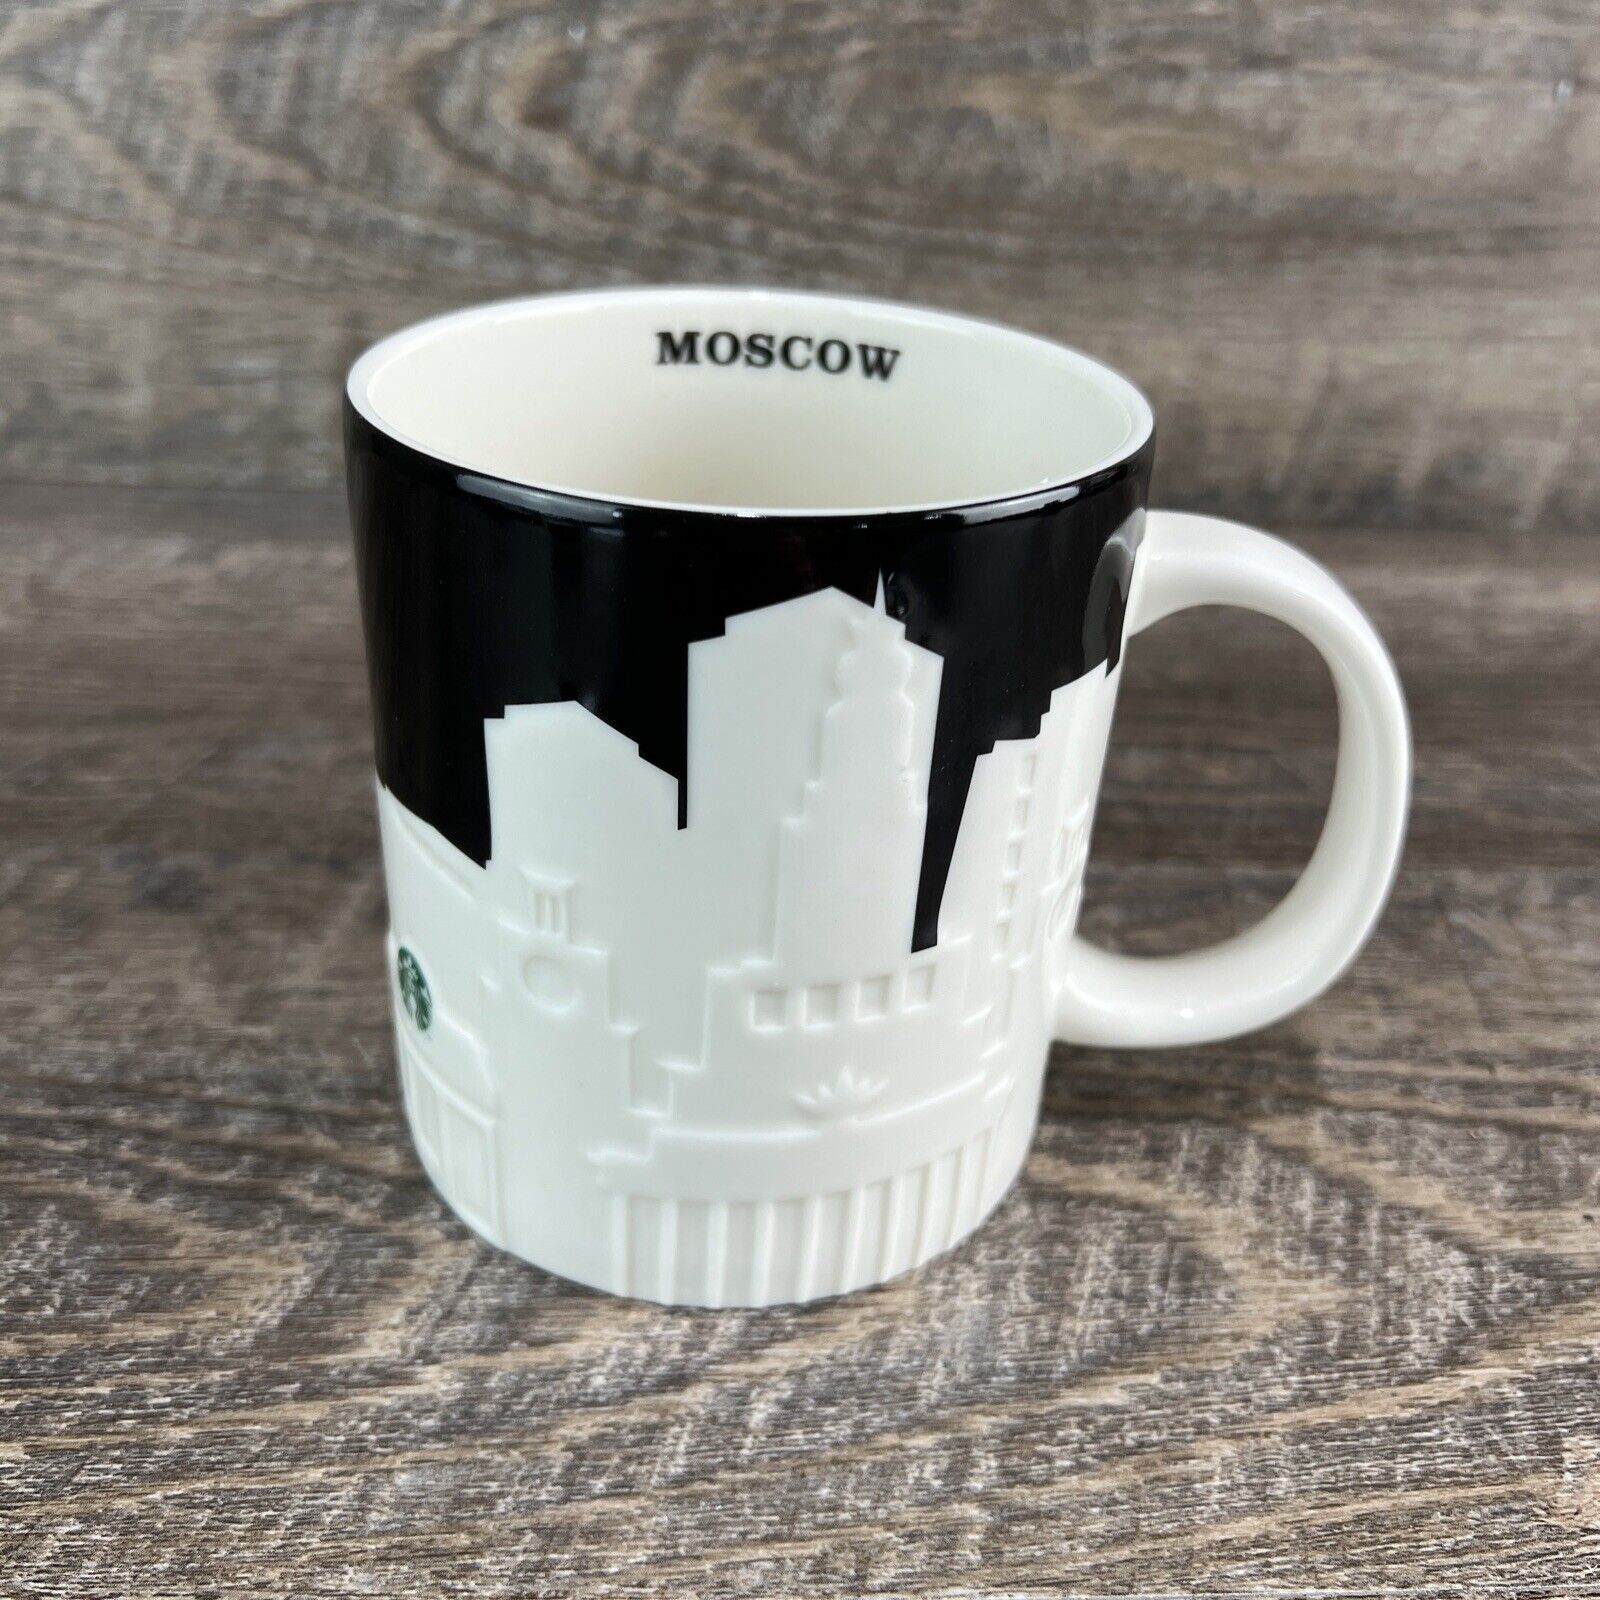 RARE STARBUCKS MOSCOW RUSSIA COLLECTOR MUG 2013 CITY RELIEF SERIES B&W Excellent